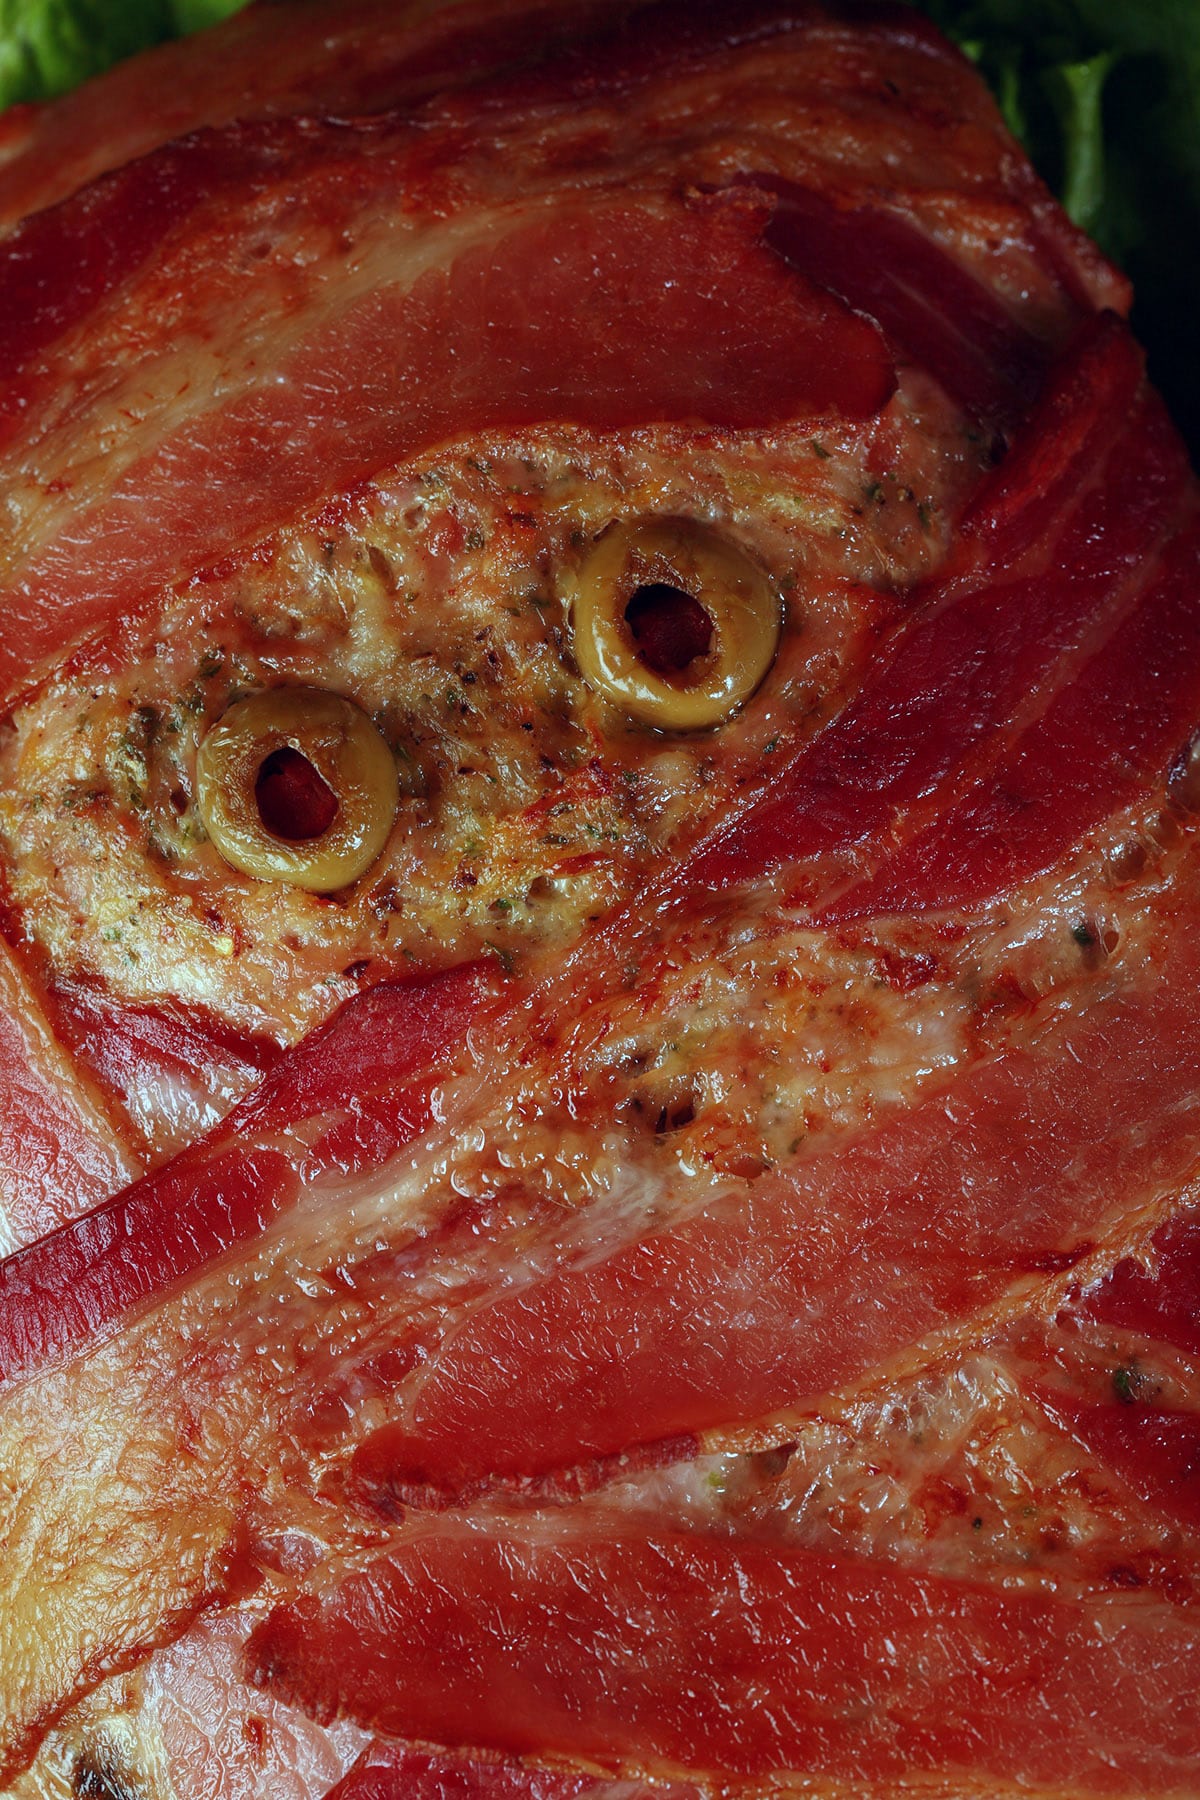 A close up view of a mummy meatloaf. It’s a bacon wrapped meatloaf with olive eyes.